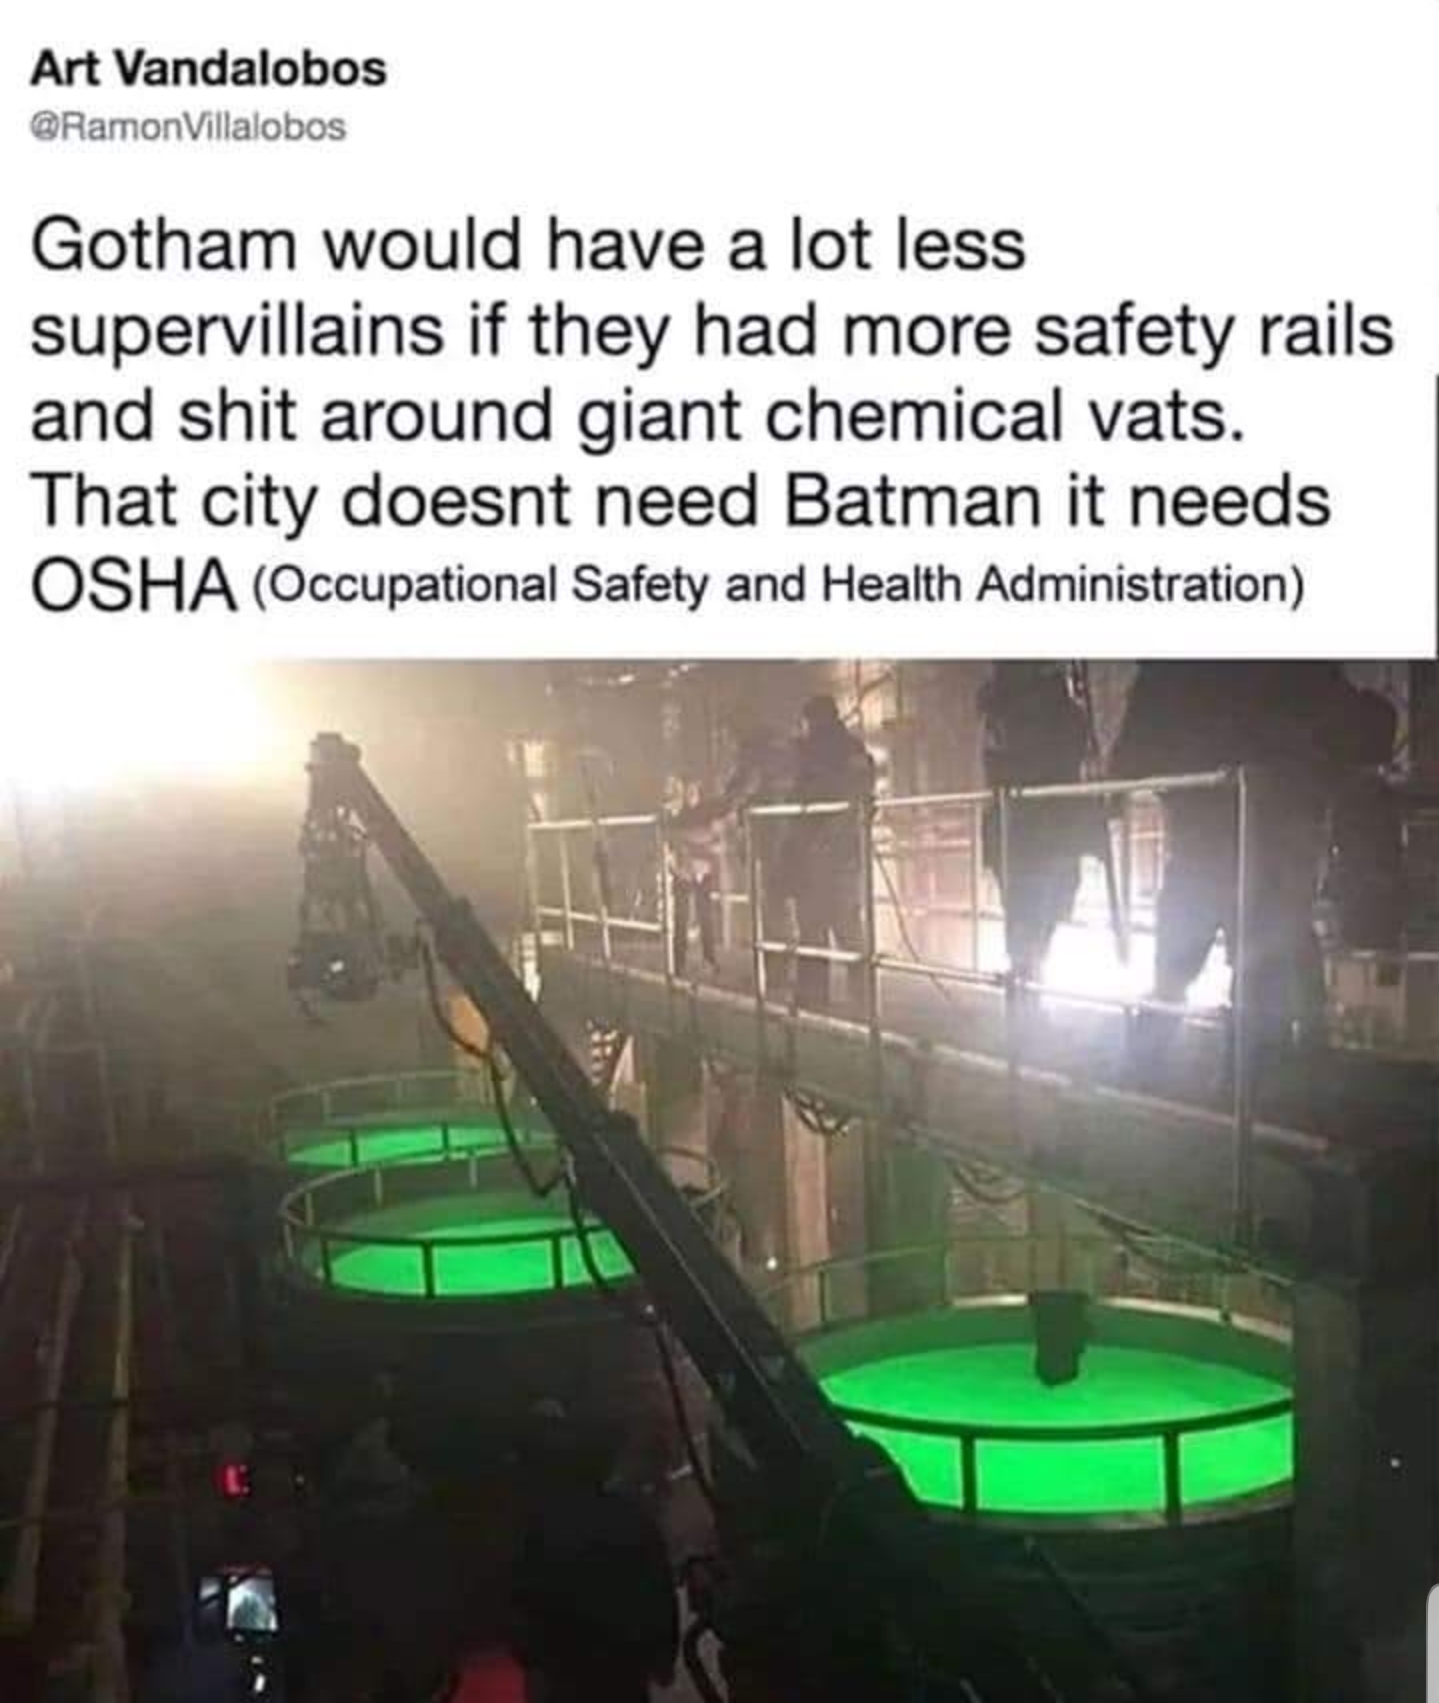 gotham osha - Art Vandalobos Villalobos Gotham would have a lot less supervillains if they had more safety rails and shit around giant chemical vats. That city doesnt need Batman it needs Osha Occupational Safety and Health Administration